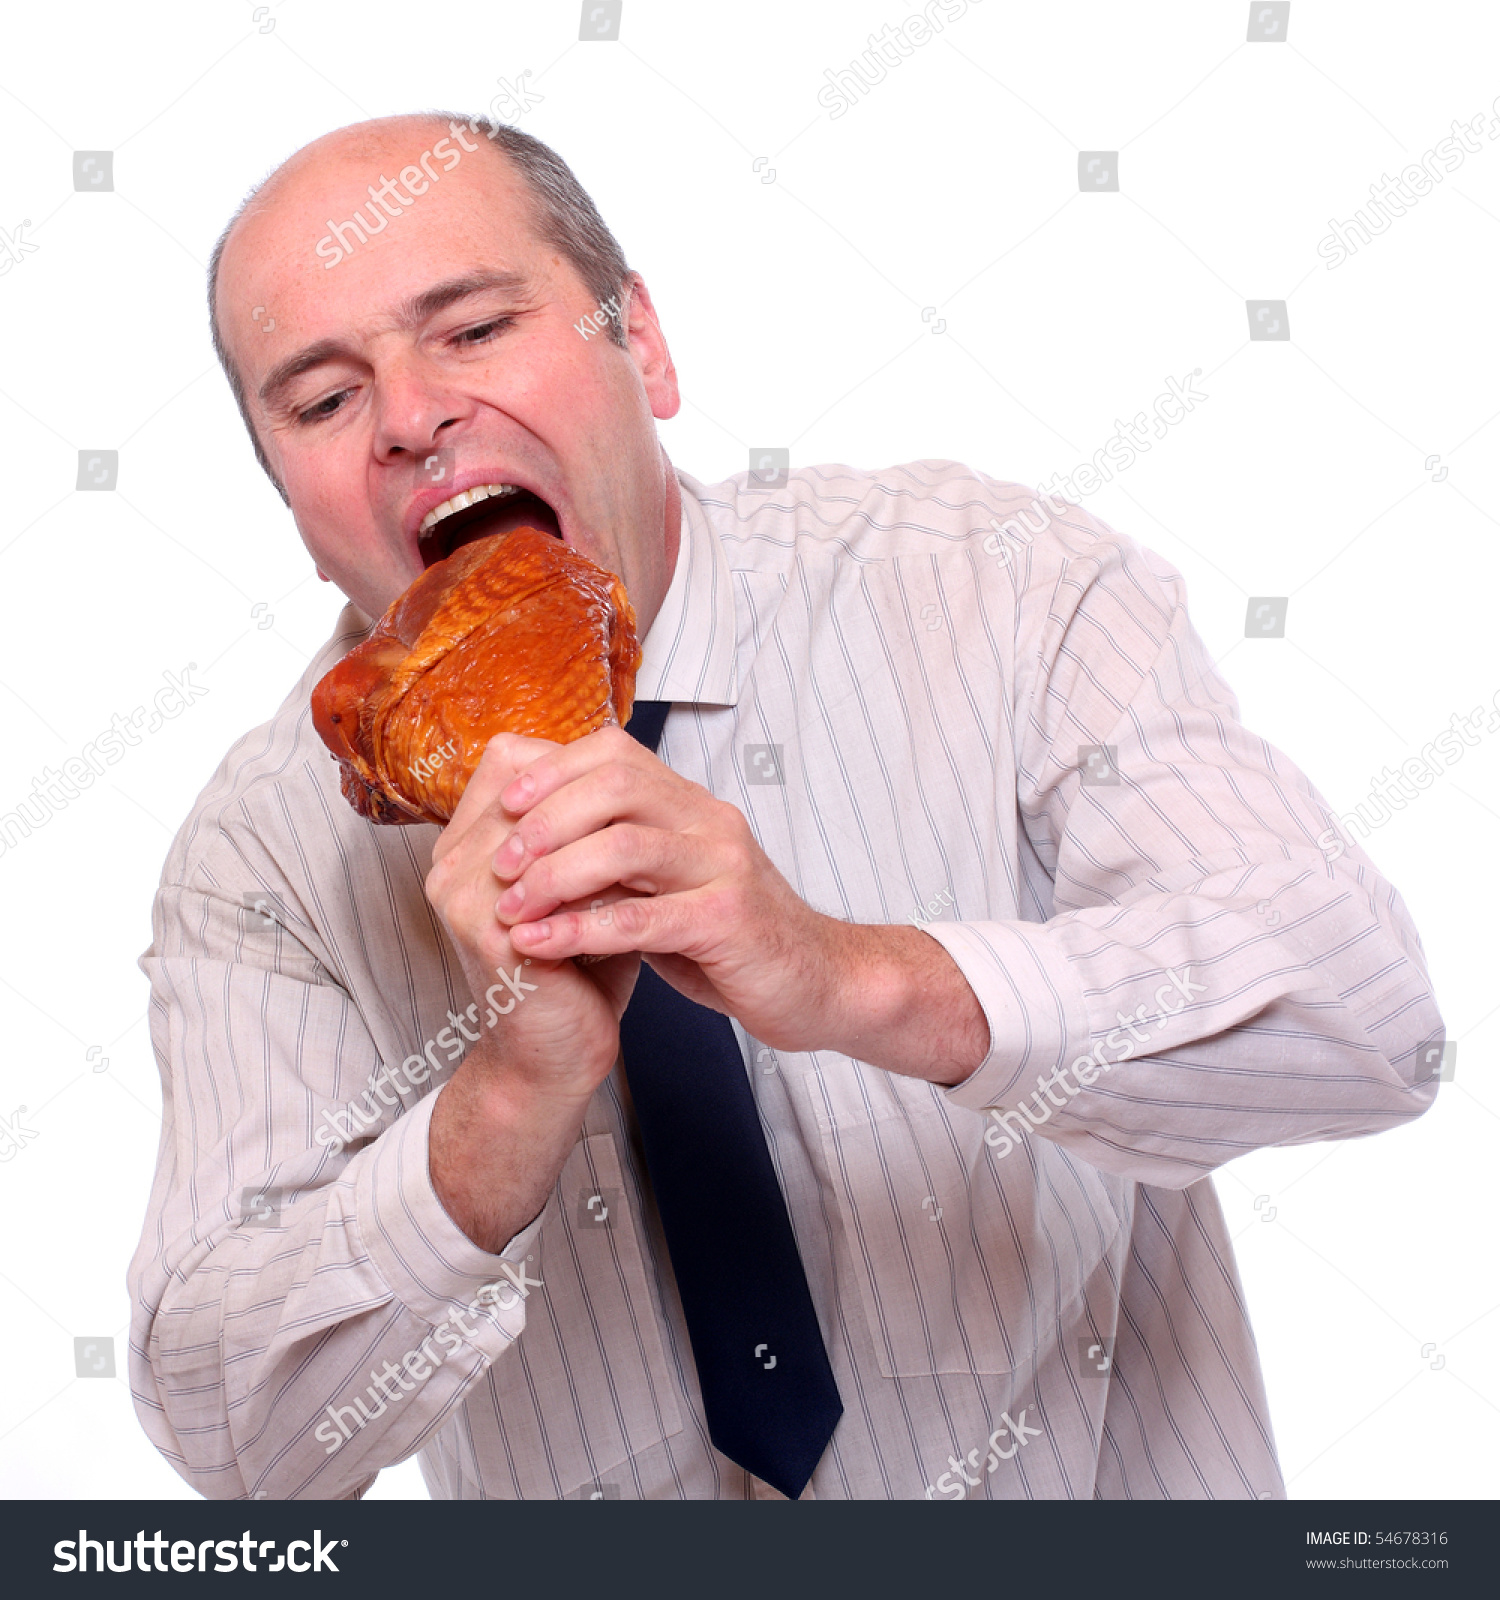 Image result for eating ham clipart